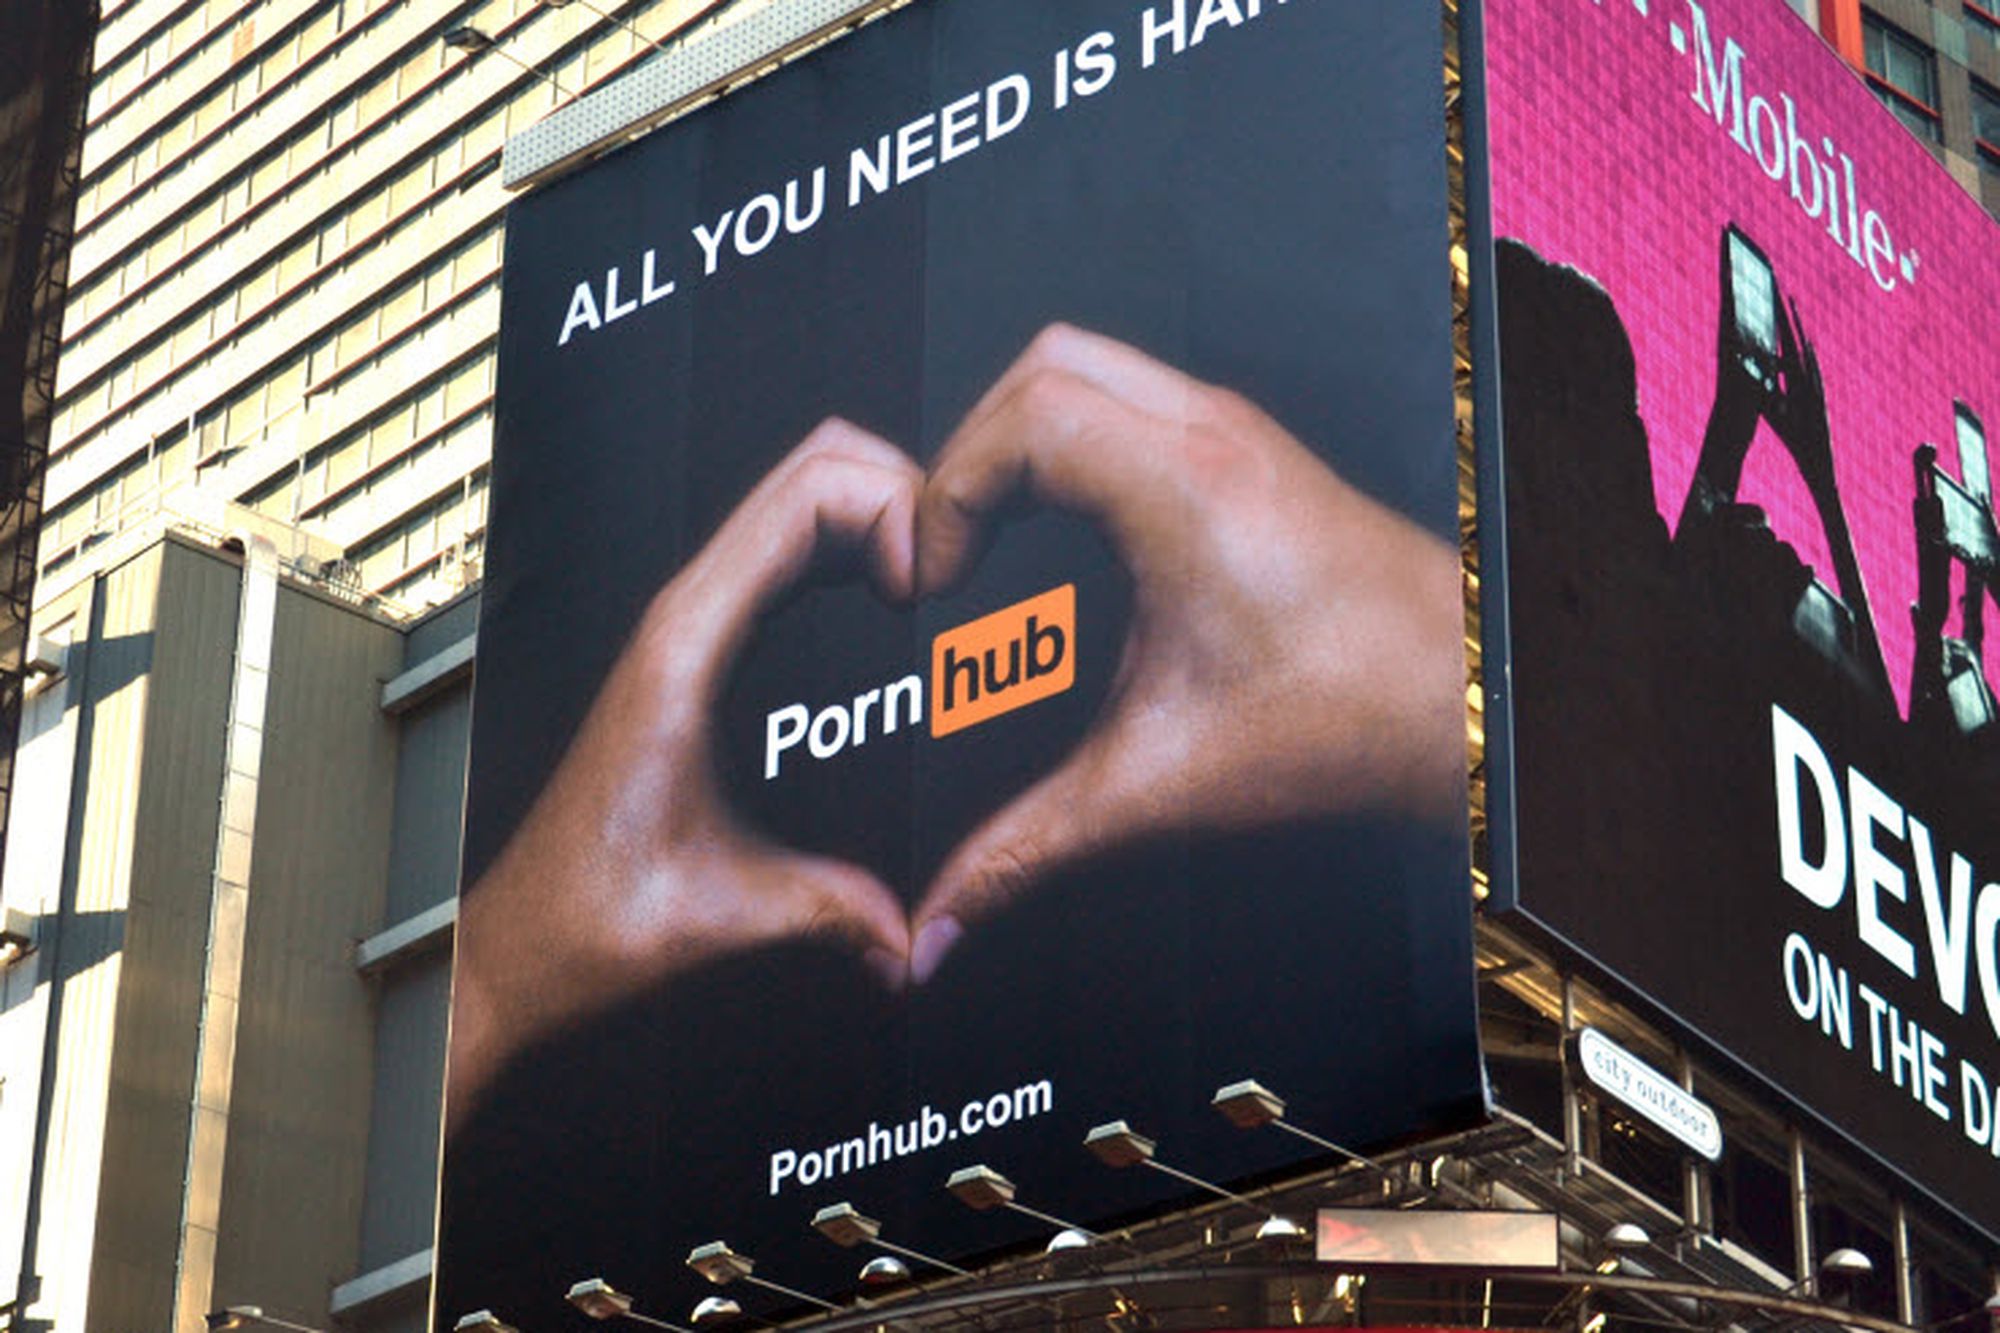 adrienne mcclain recommends Download Pornhub Paid Videos